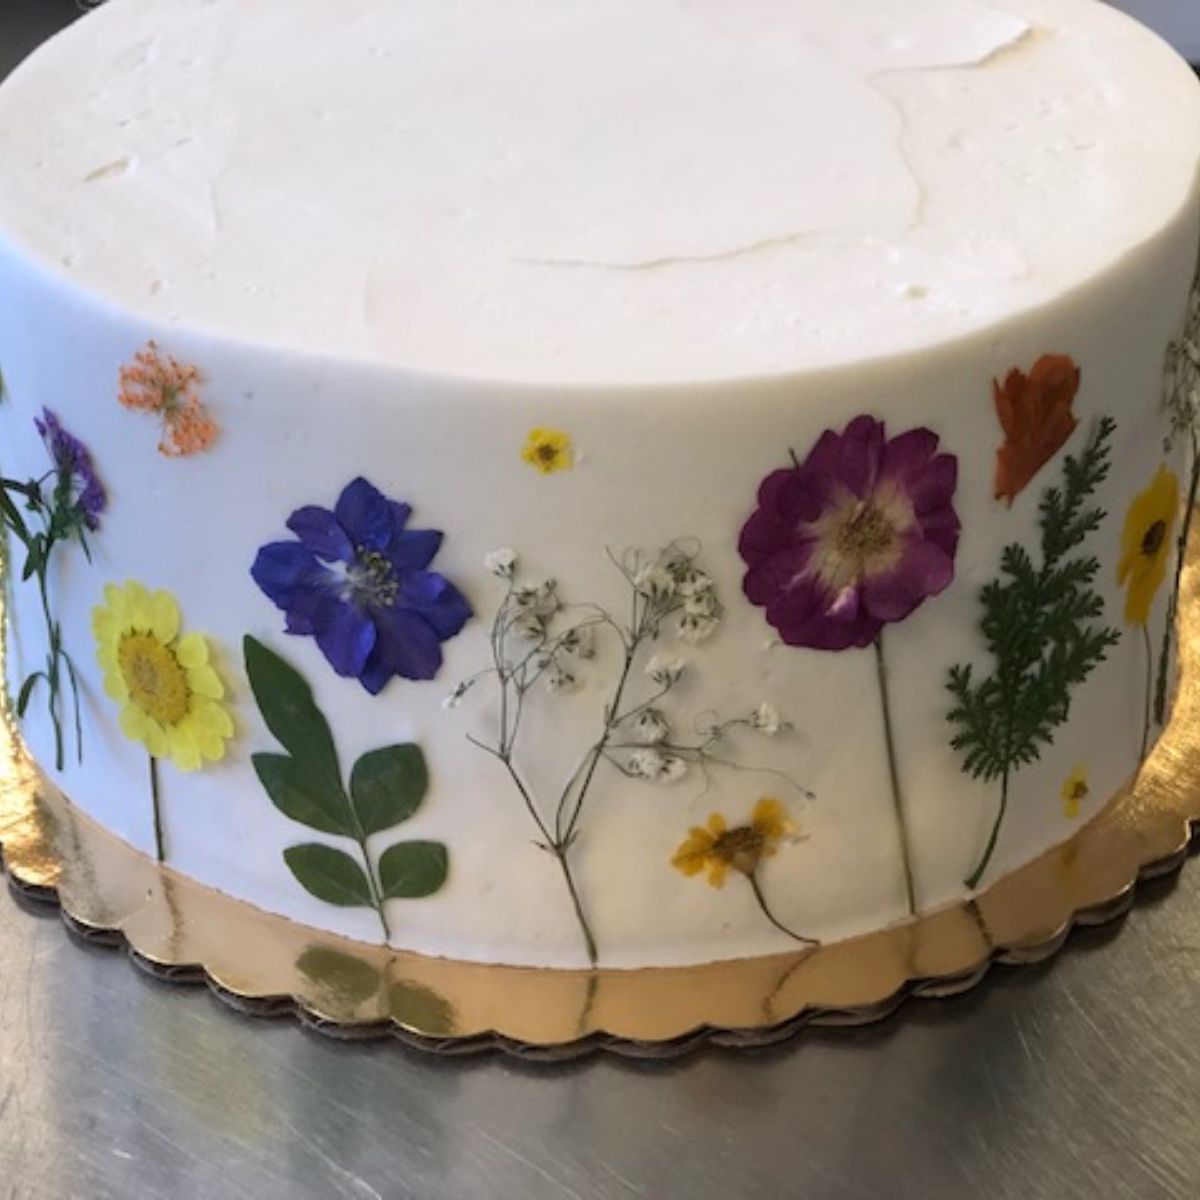 How to Make a Buttercream Flower Cake - Style Sweet